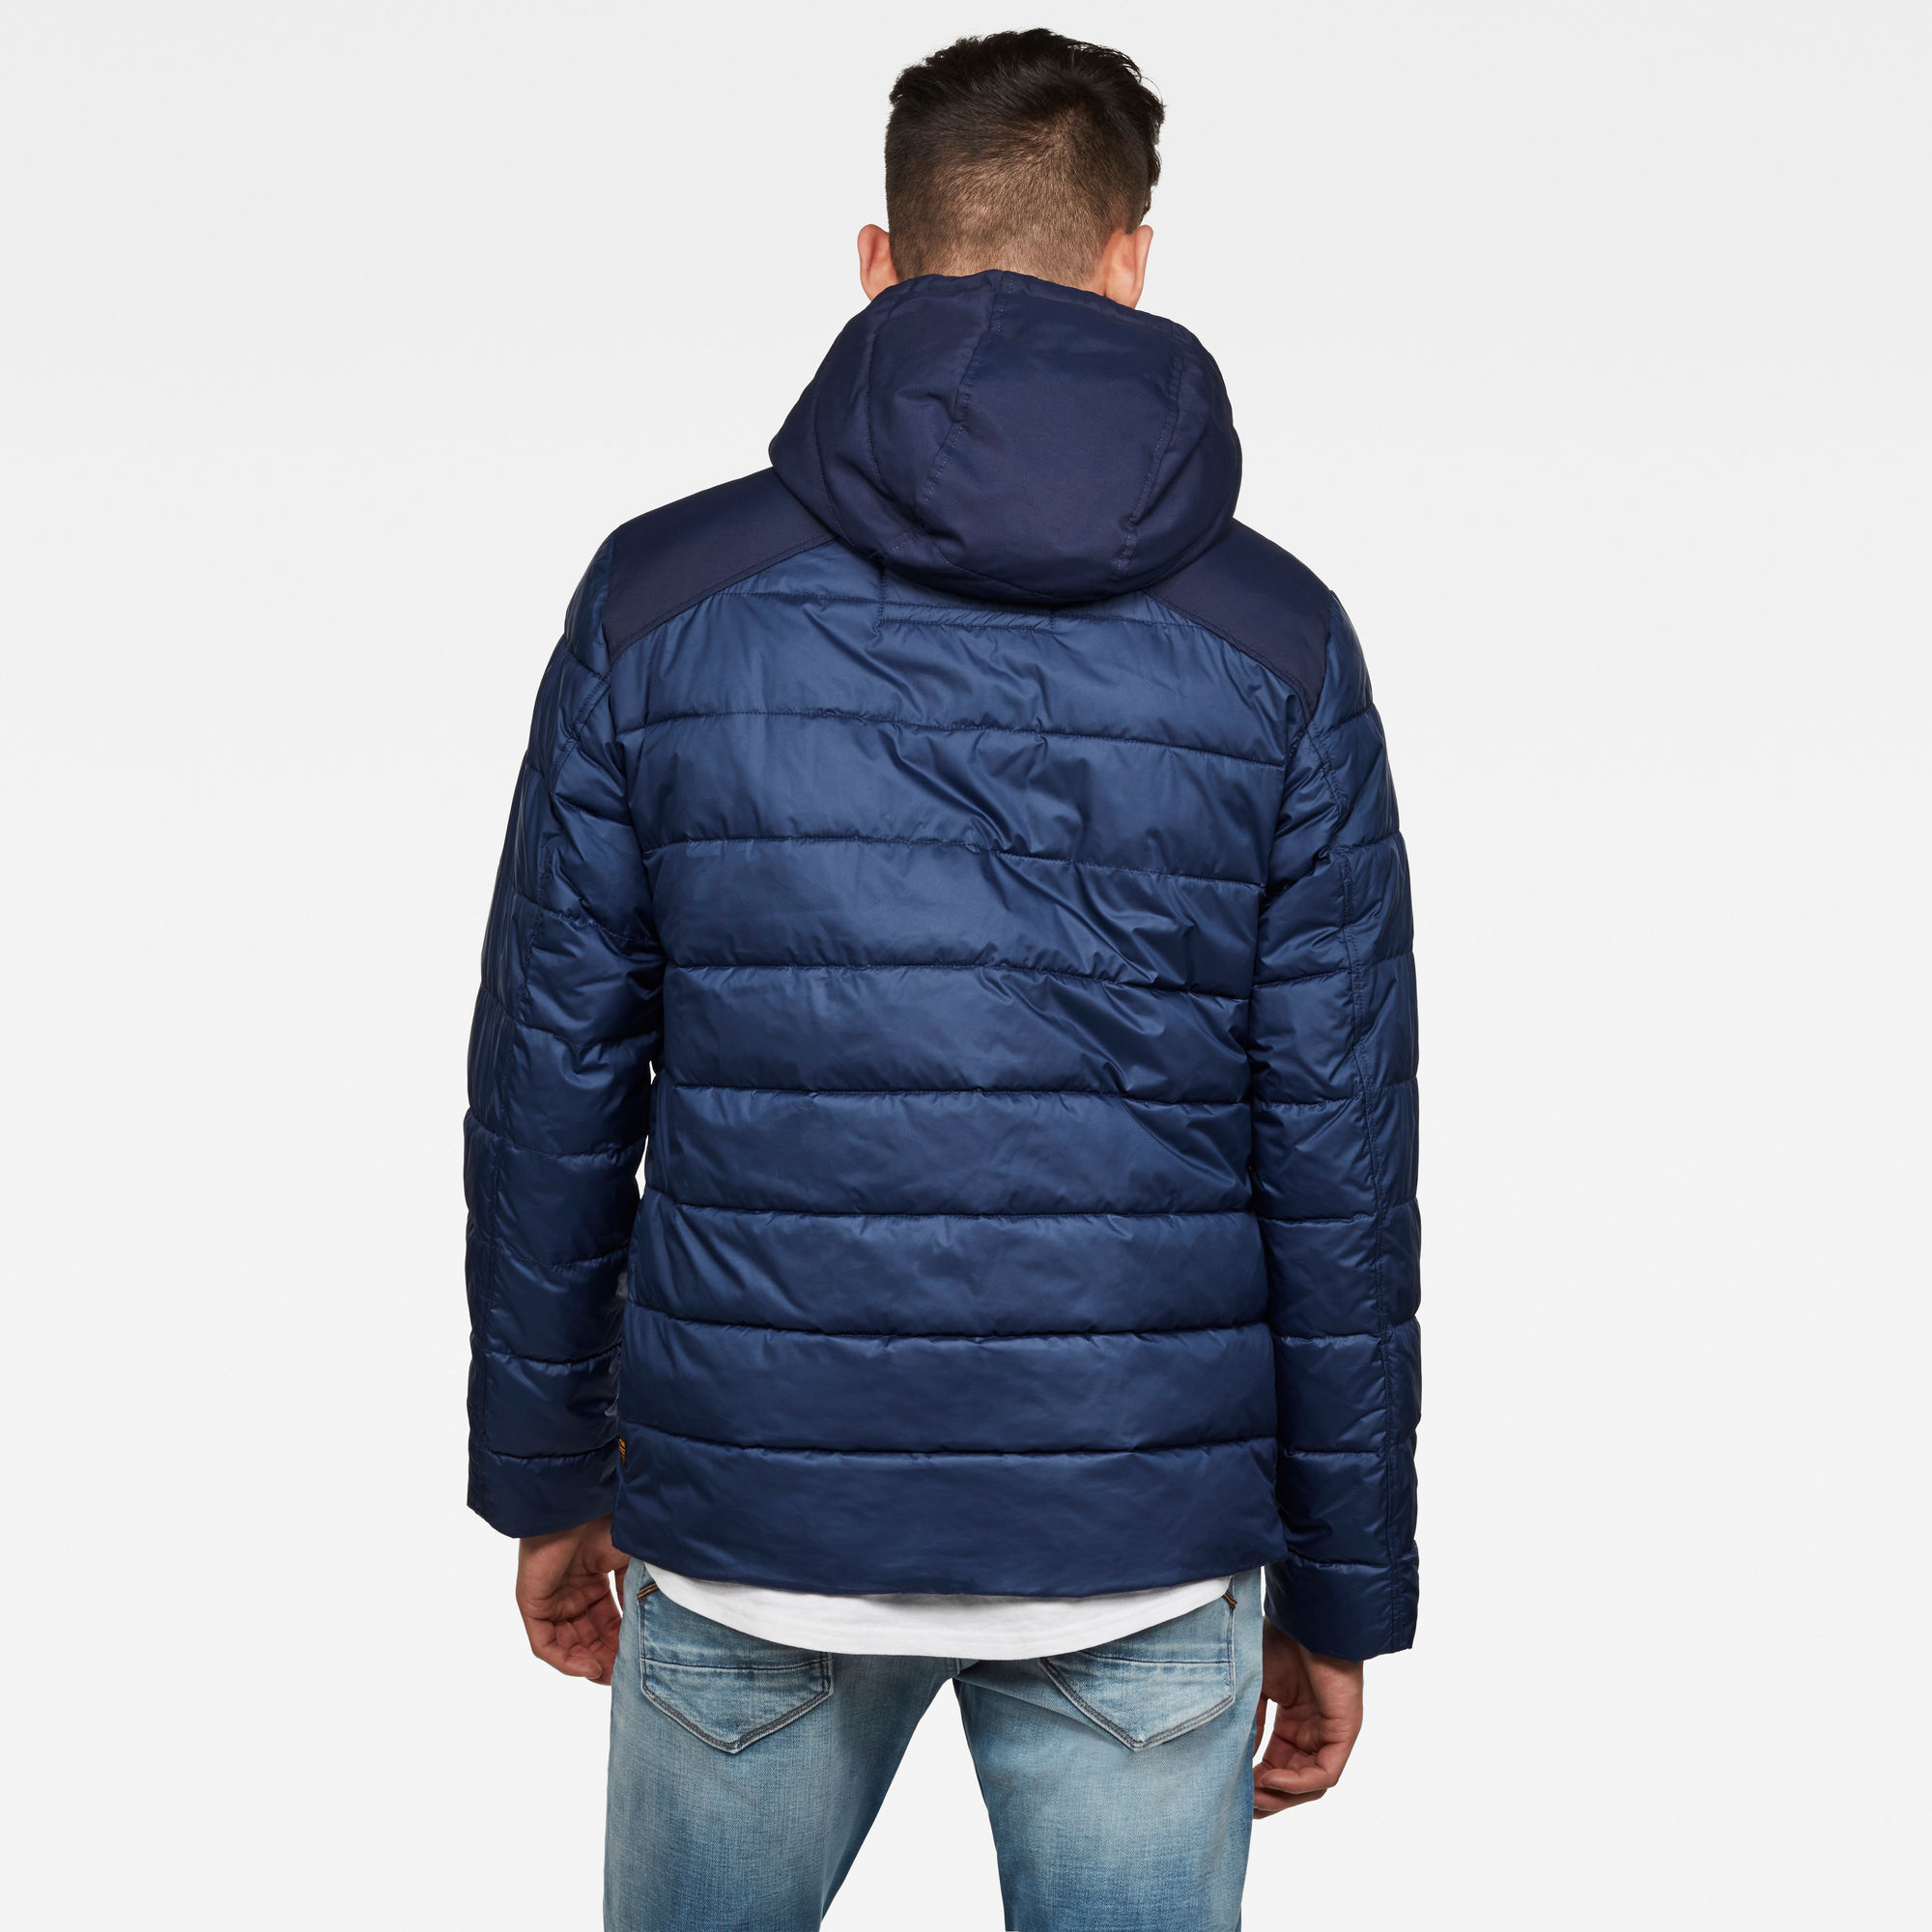 Attacc Quilted Hooded Jacket | Dark blue | G-Star RAW®